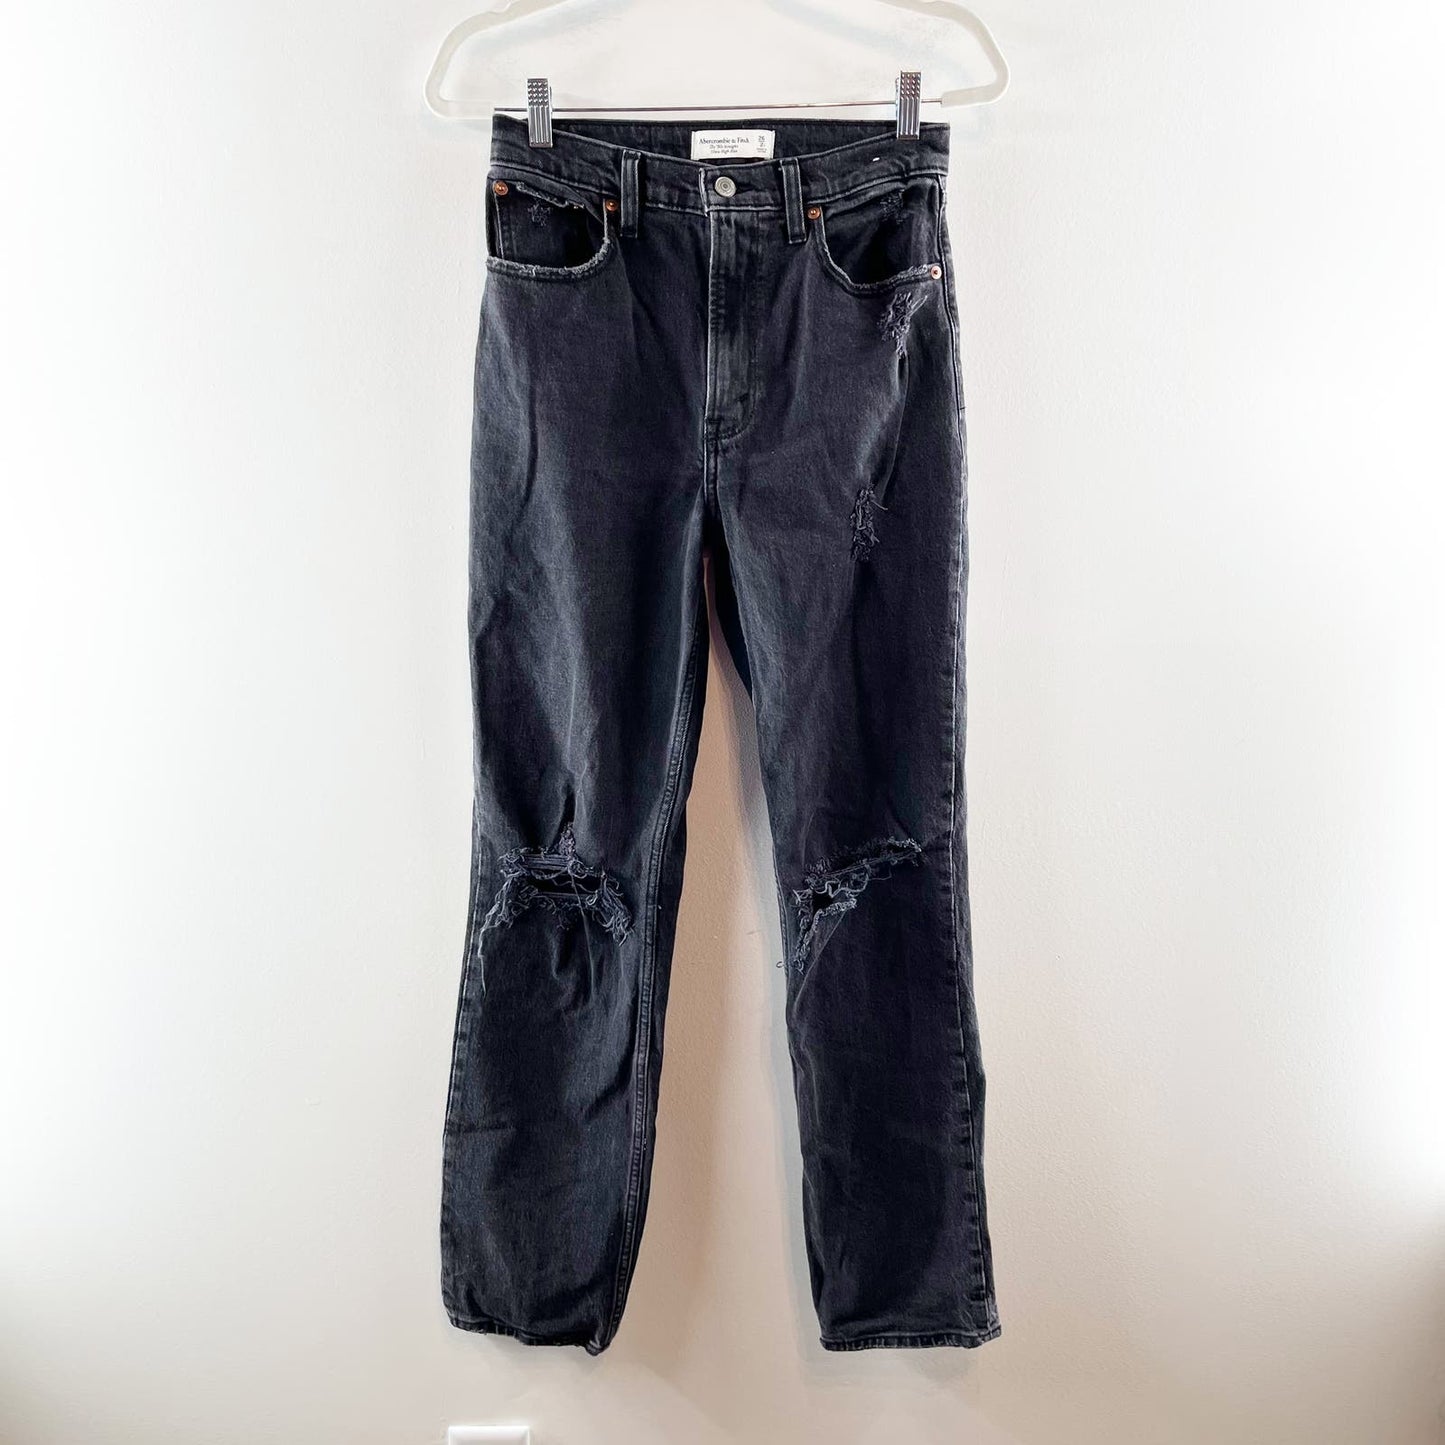 Abercrombie & Fitch The '90's Straight Ultra High Rise Jeans Black 2